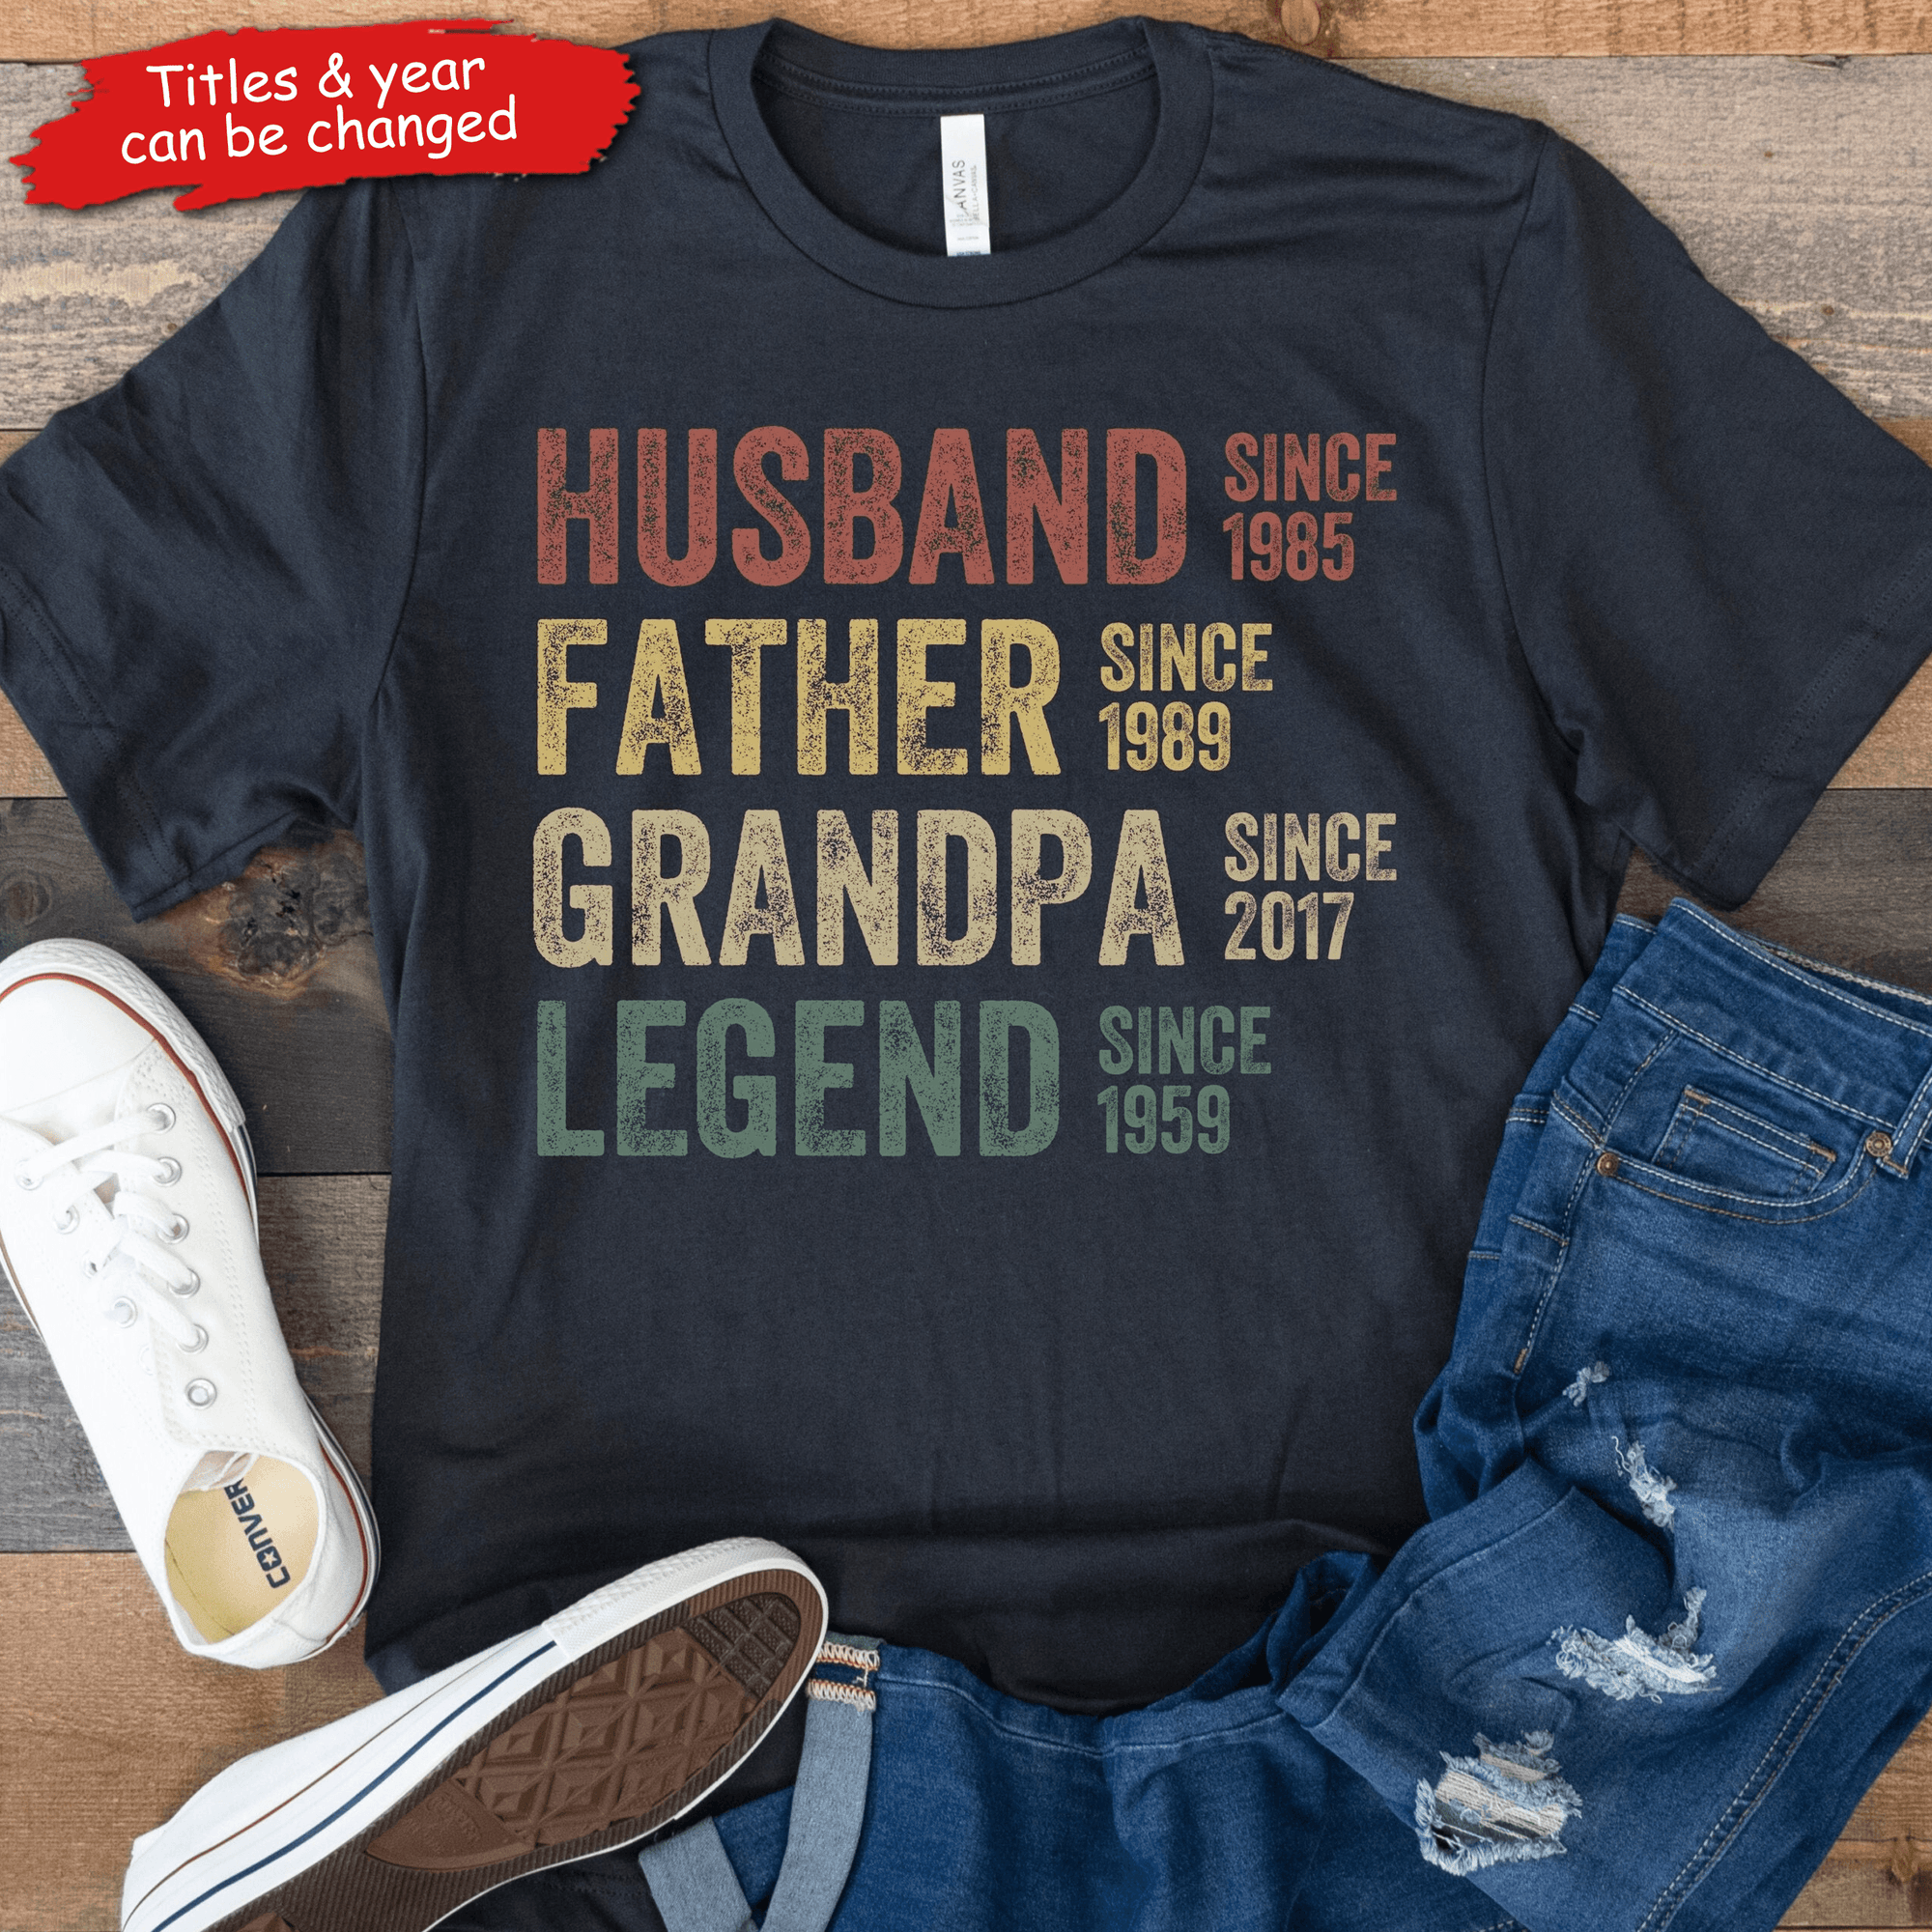 Husband, Father, Grandpa, Legend: The Journey of a Lifetime - Personalized Custom Year T Shirt - Father's Day, Birthday Gift for Dad, Grandpa, Husband, Daddy, Dada, Papa, Dad Jokes - Suzitee Store